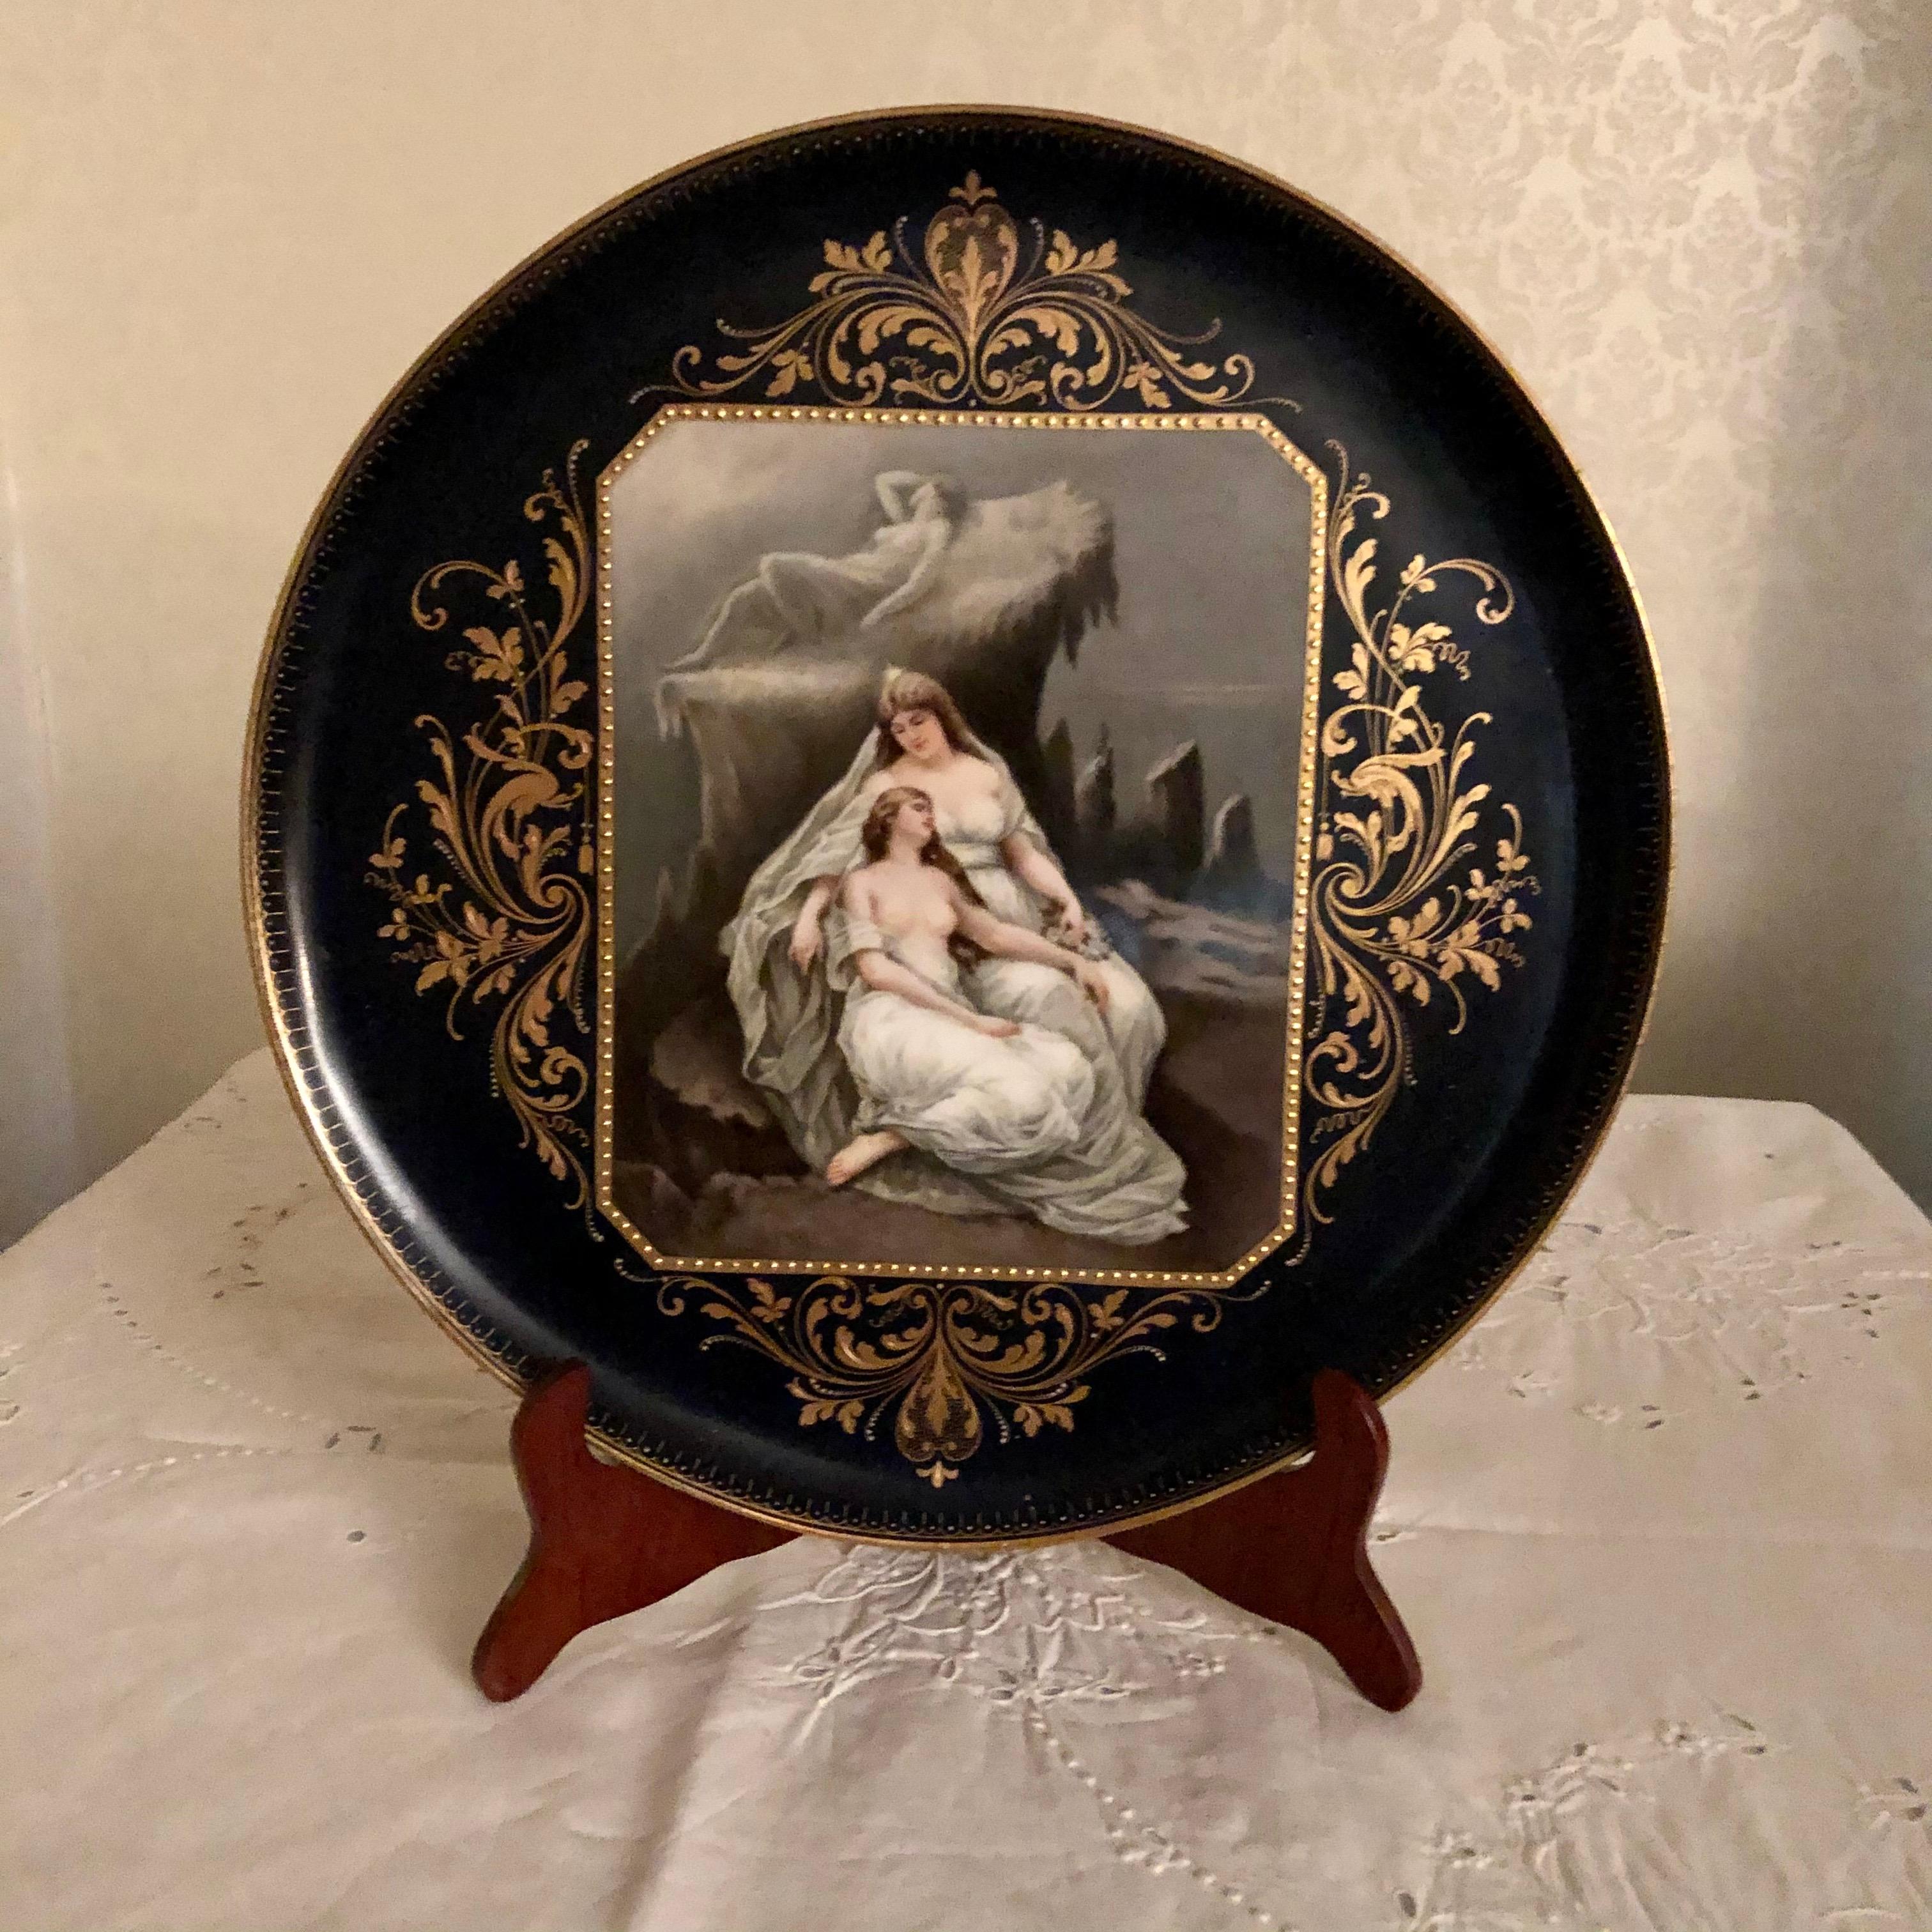 This is a beautifully painted cobalt Austrian porcelain plaque entitled 